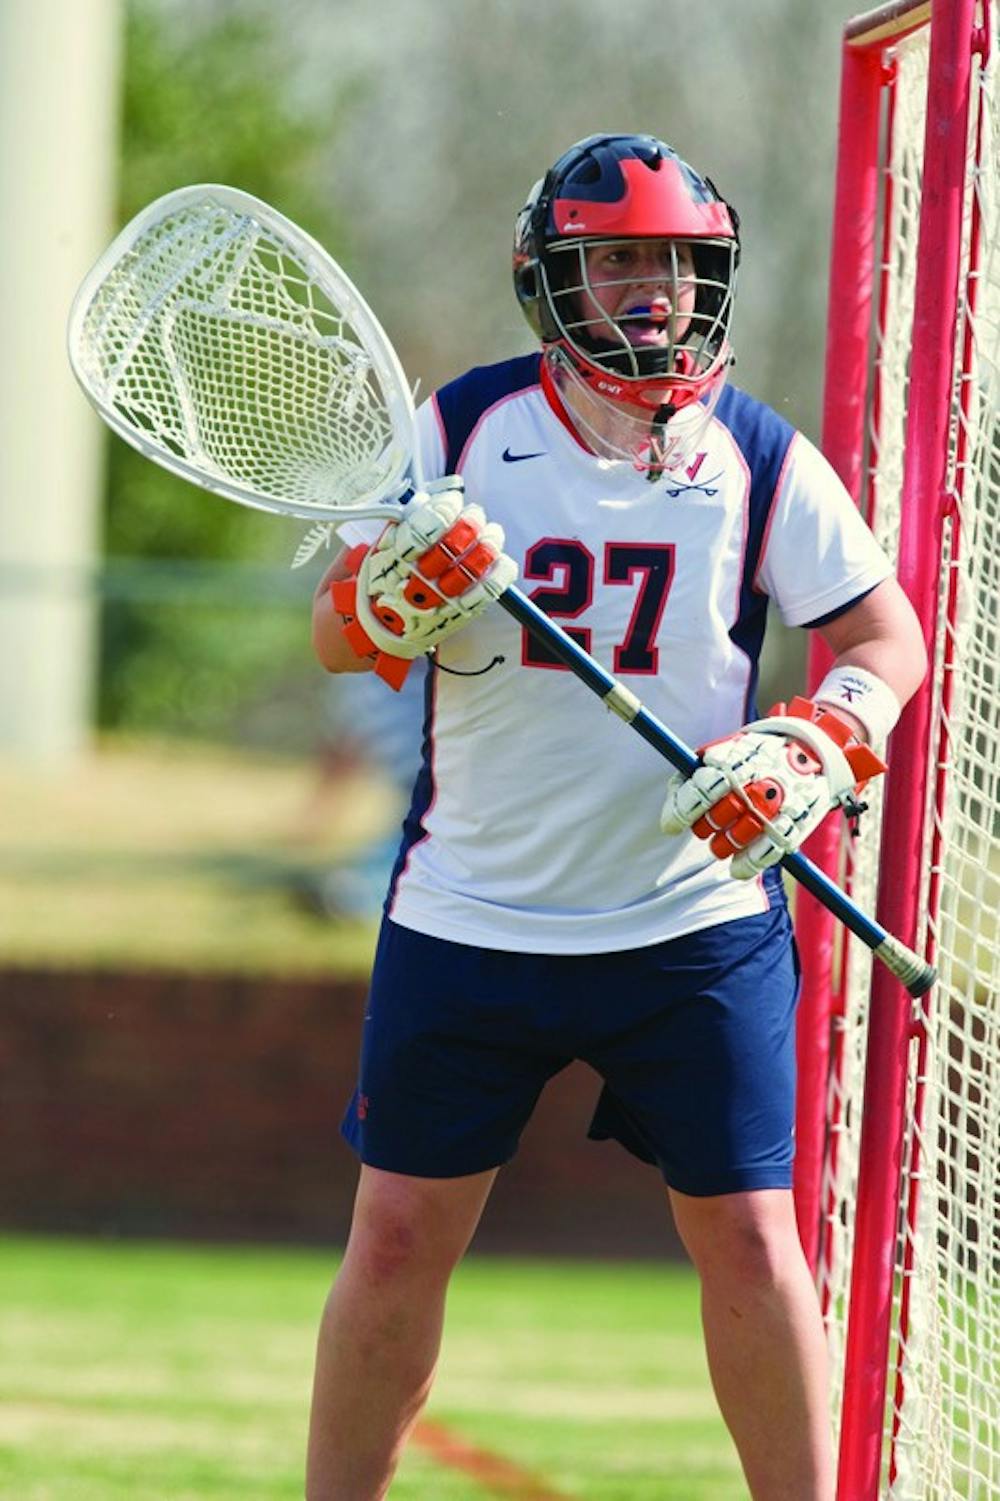 Virginia goalkeeper Lauren Benner (27).  The #2 ranked Virginia Cavaliers women's lacrosse team defeated the Penn State Nittany Lions 12-11 in overtime at Klockner Stadium on the Grounds of the University of Virginia in Charlottesville, VA on March 7, 2009.